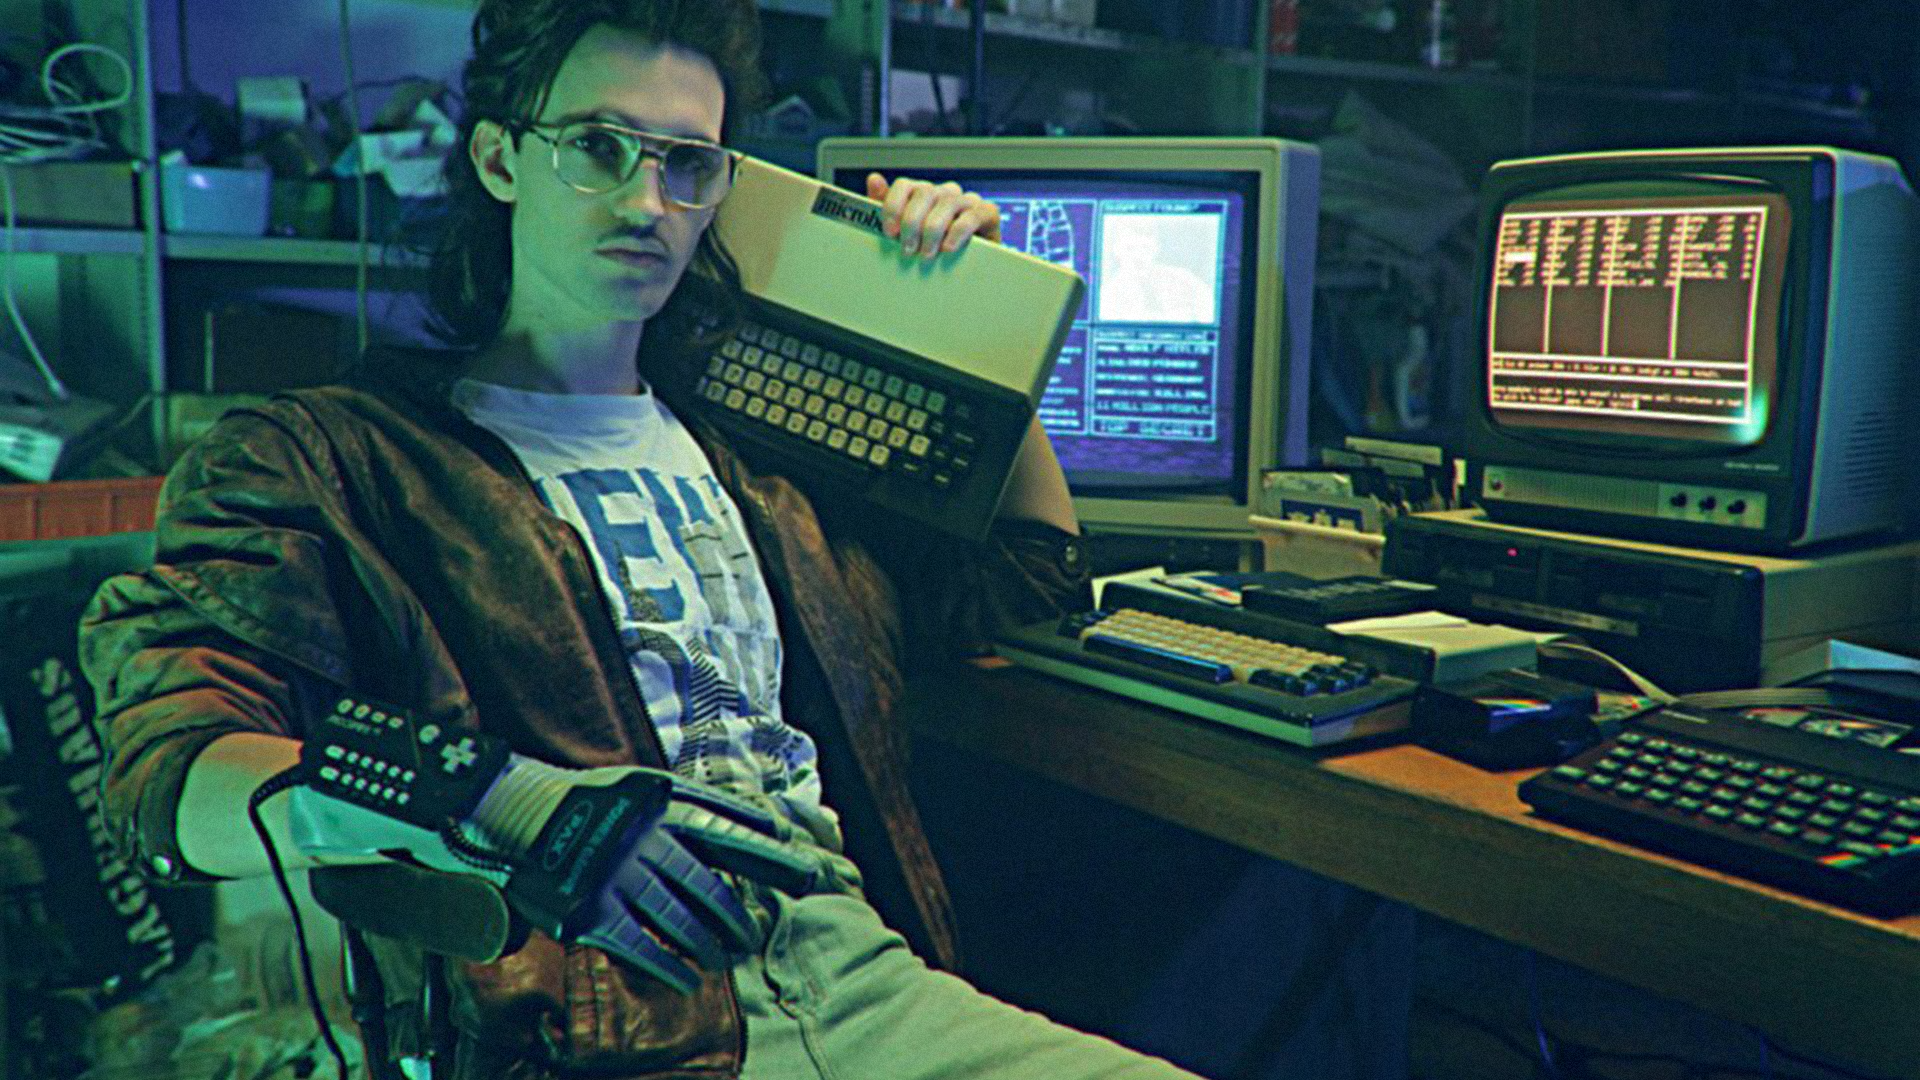 Hackerman with his Power Glove